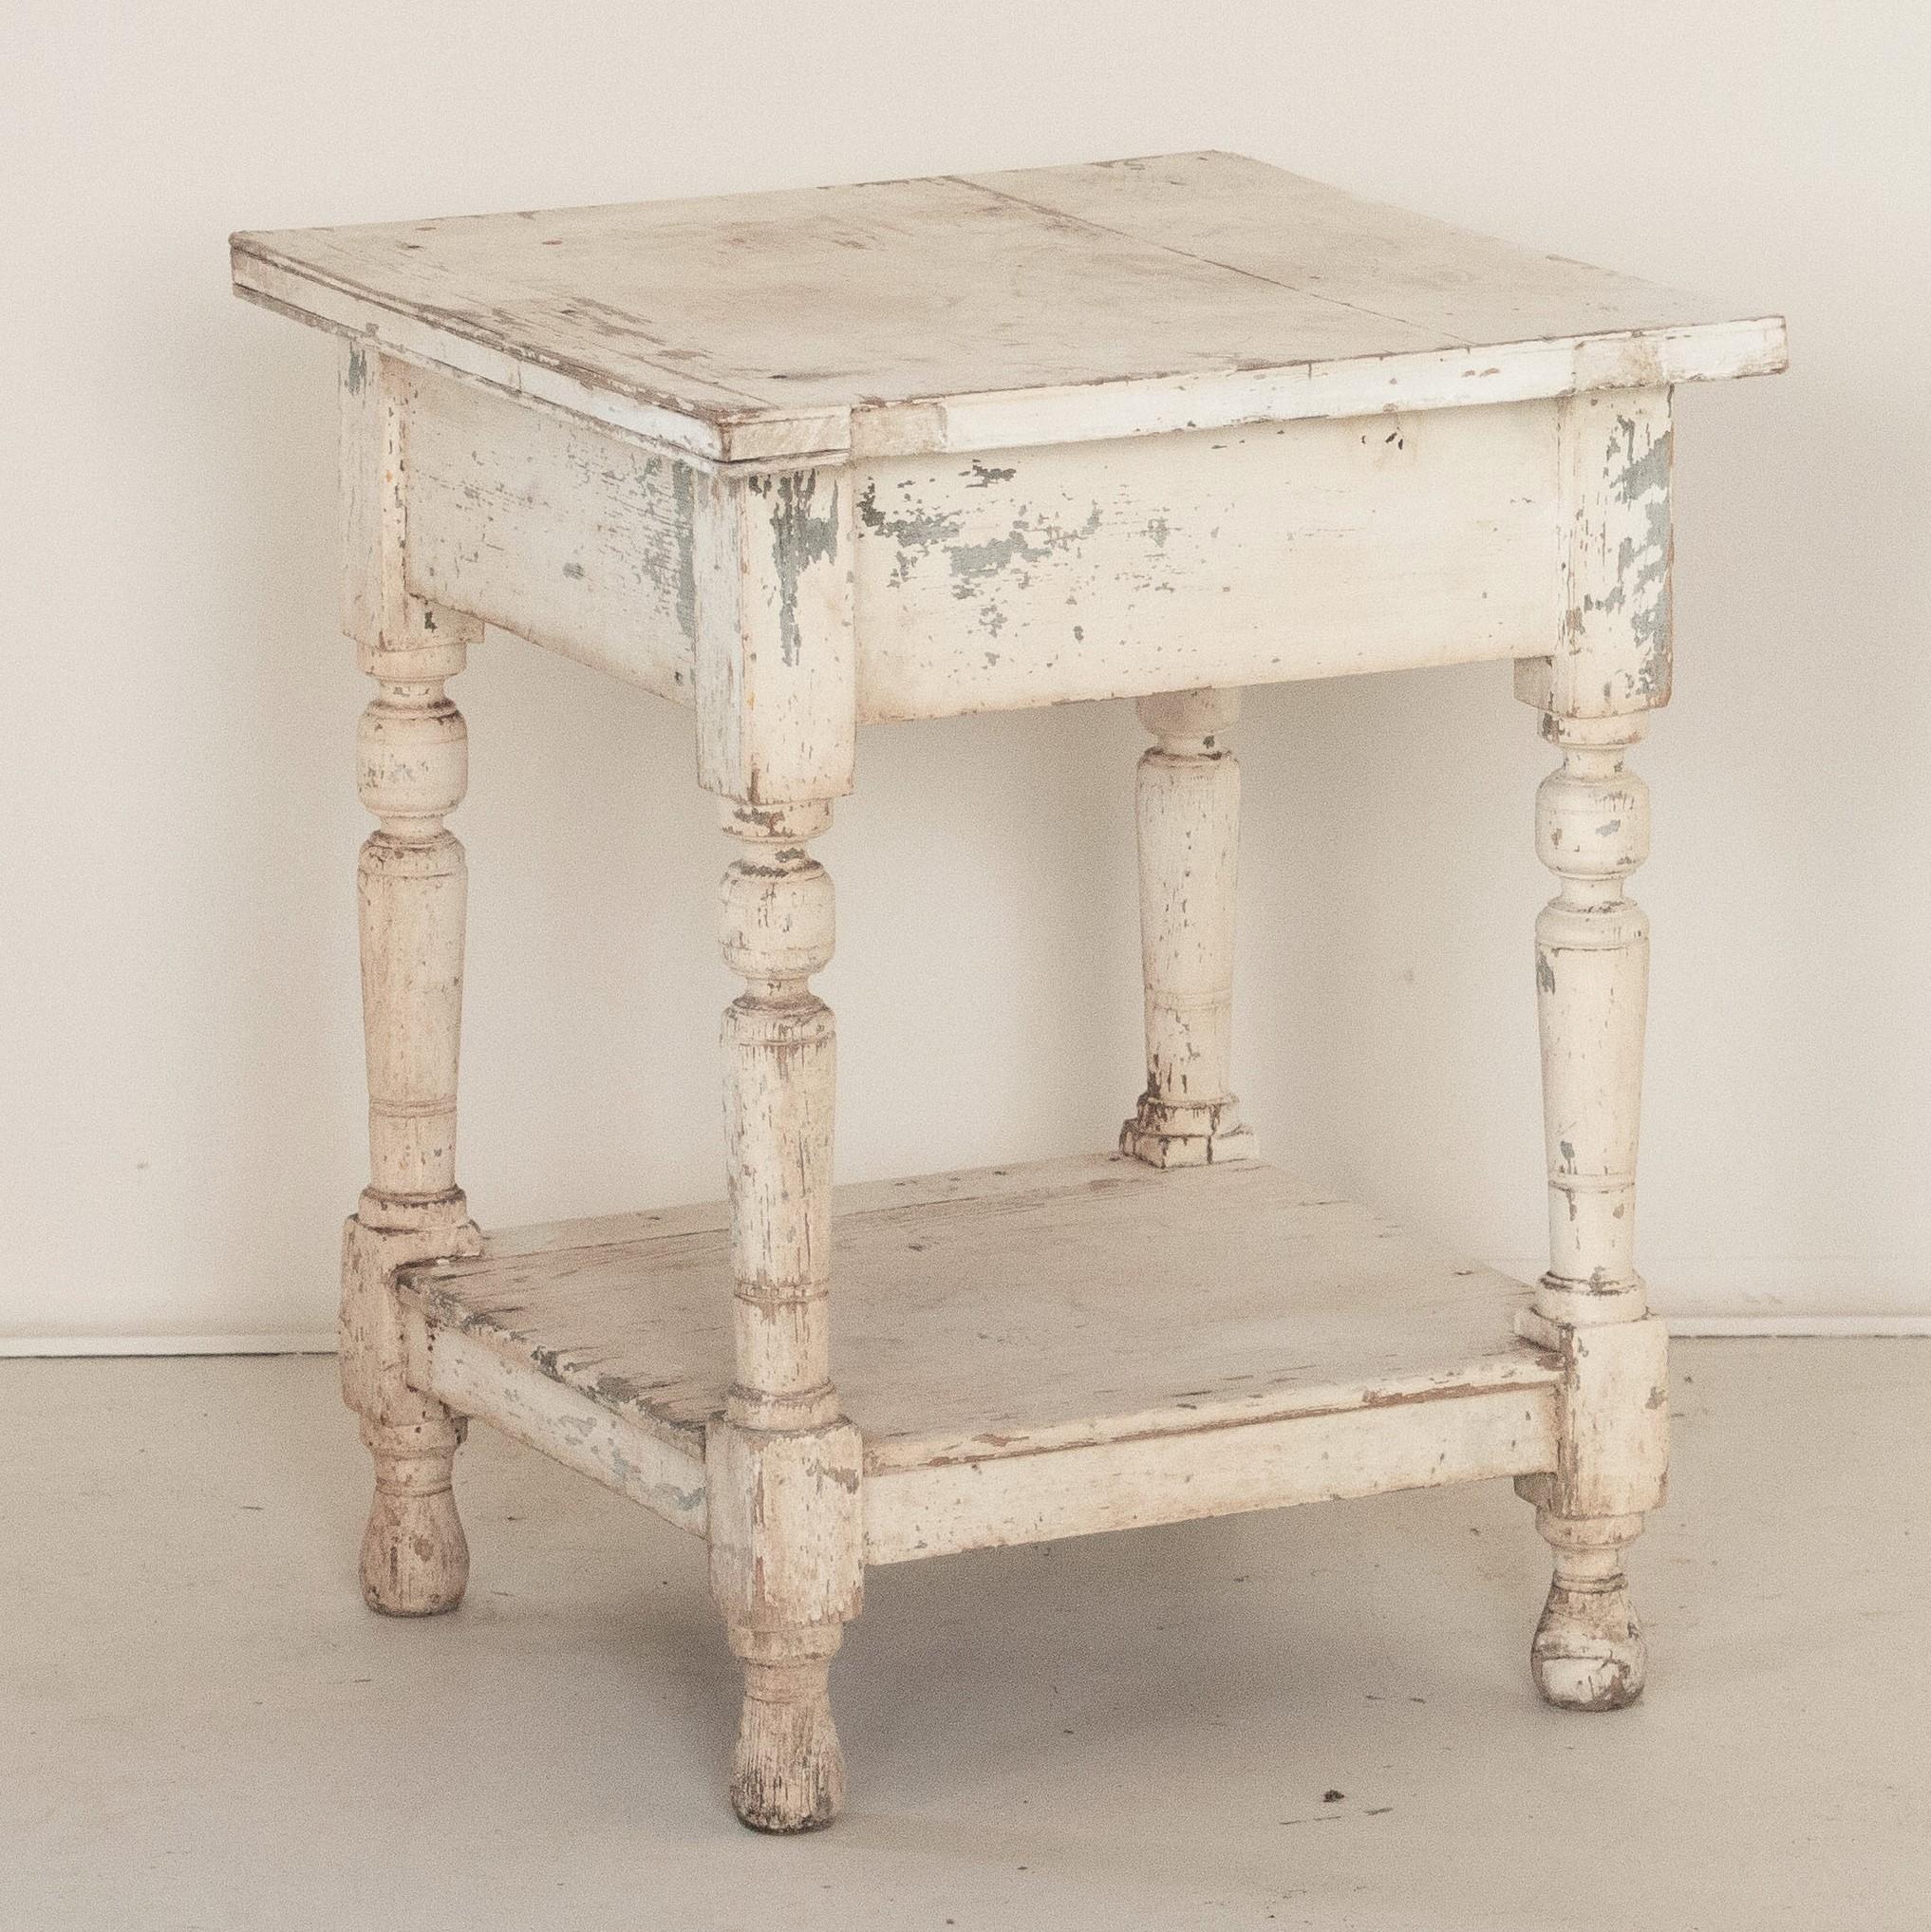 Loaded with charm in a small package, the original white paint is all original on this delightful side table or nightstand. The paint has been naturally distressed and worn over time, adding loads of character to its vintage look. While small, the